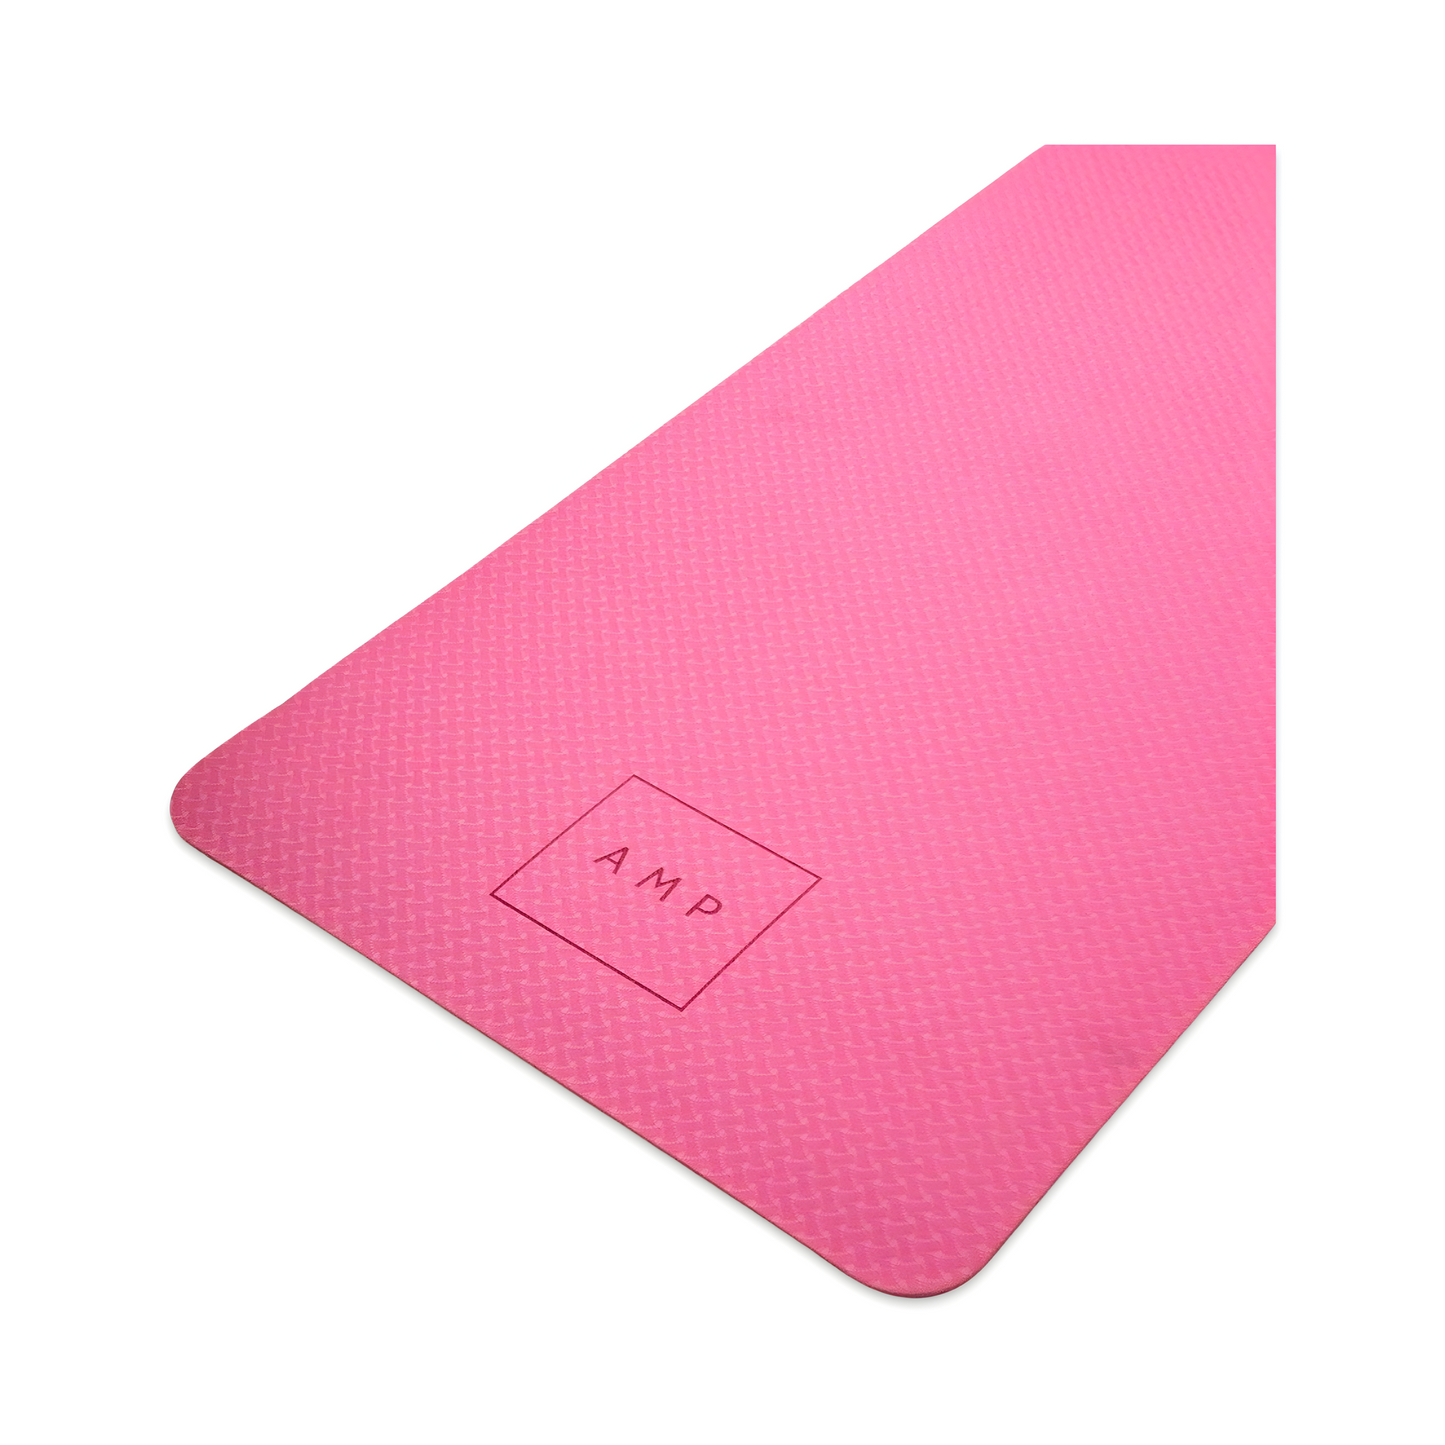 Rose pink fitness and yoga mat 6mm thickness cushioned and supportive